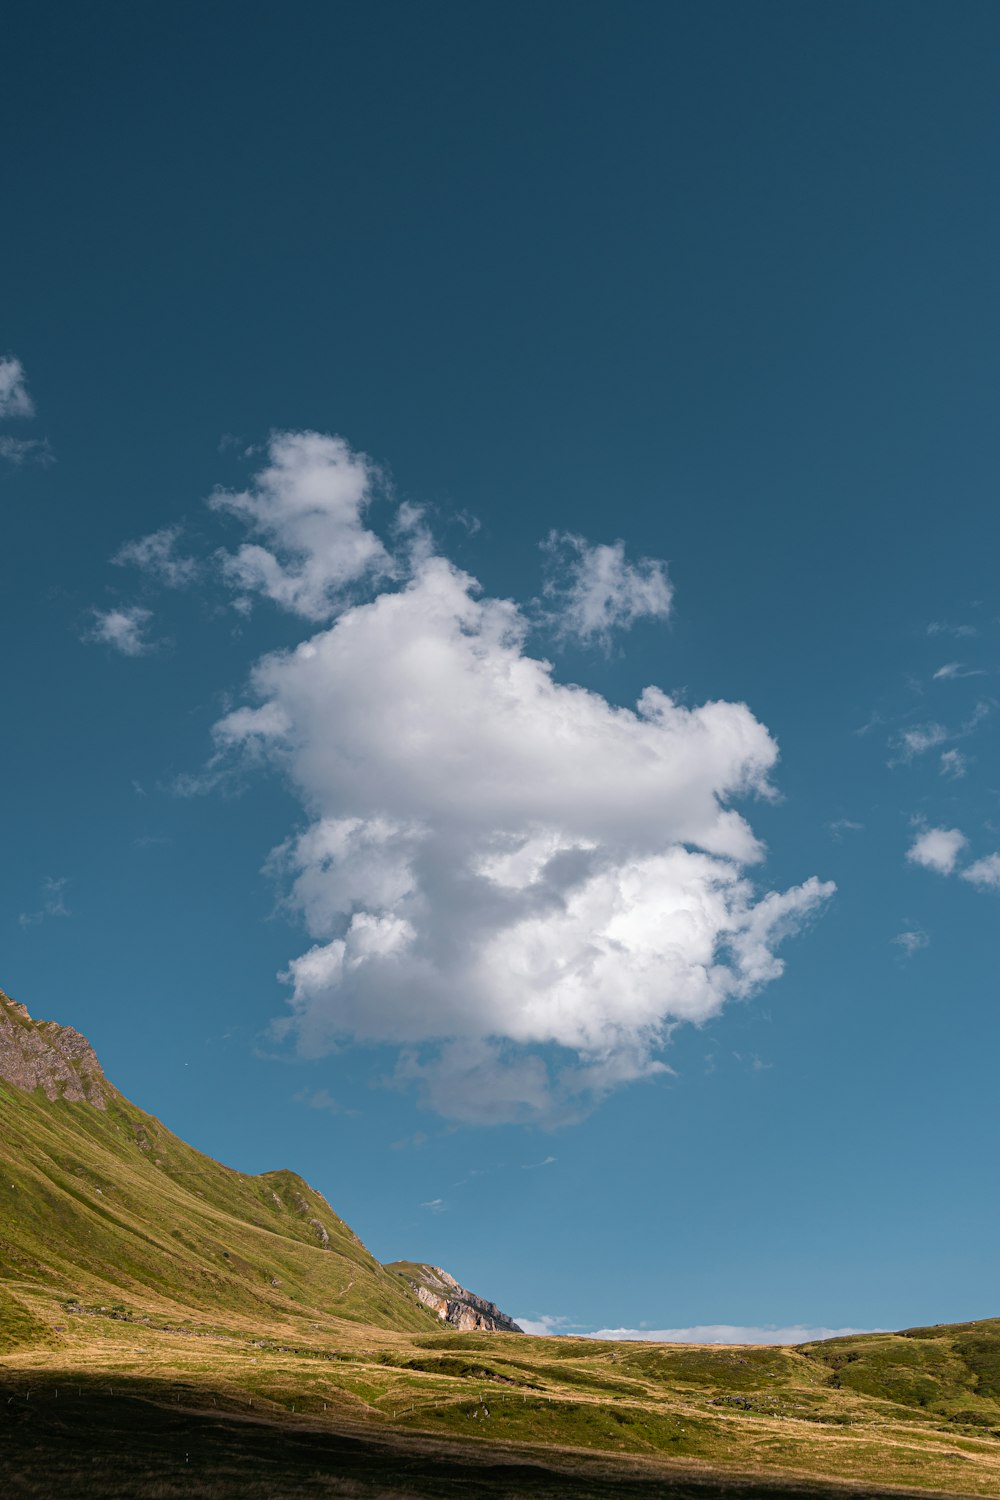 a large cloud is in the sky above a grassy hill